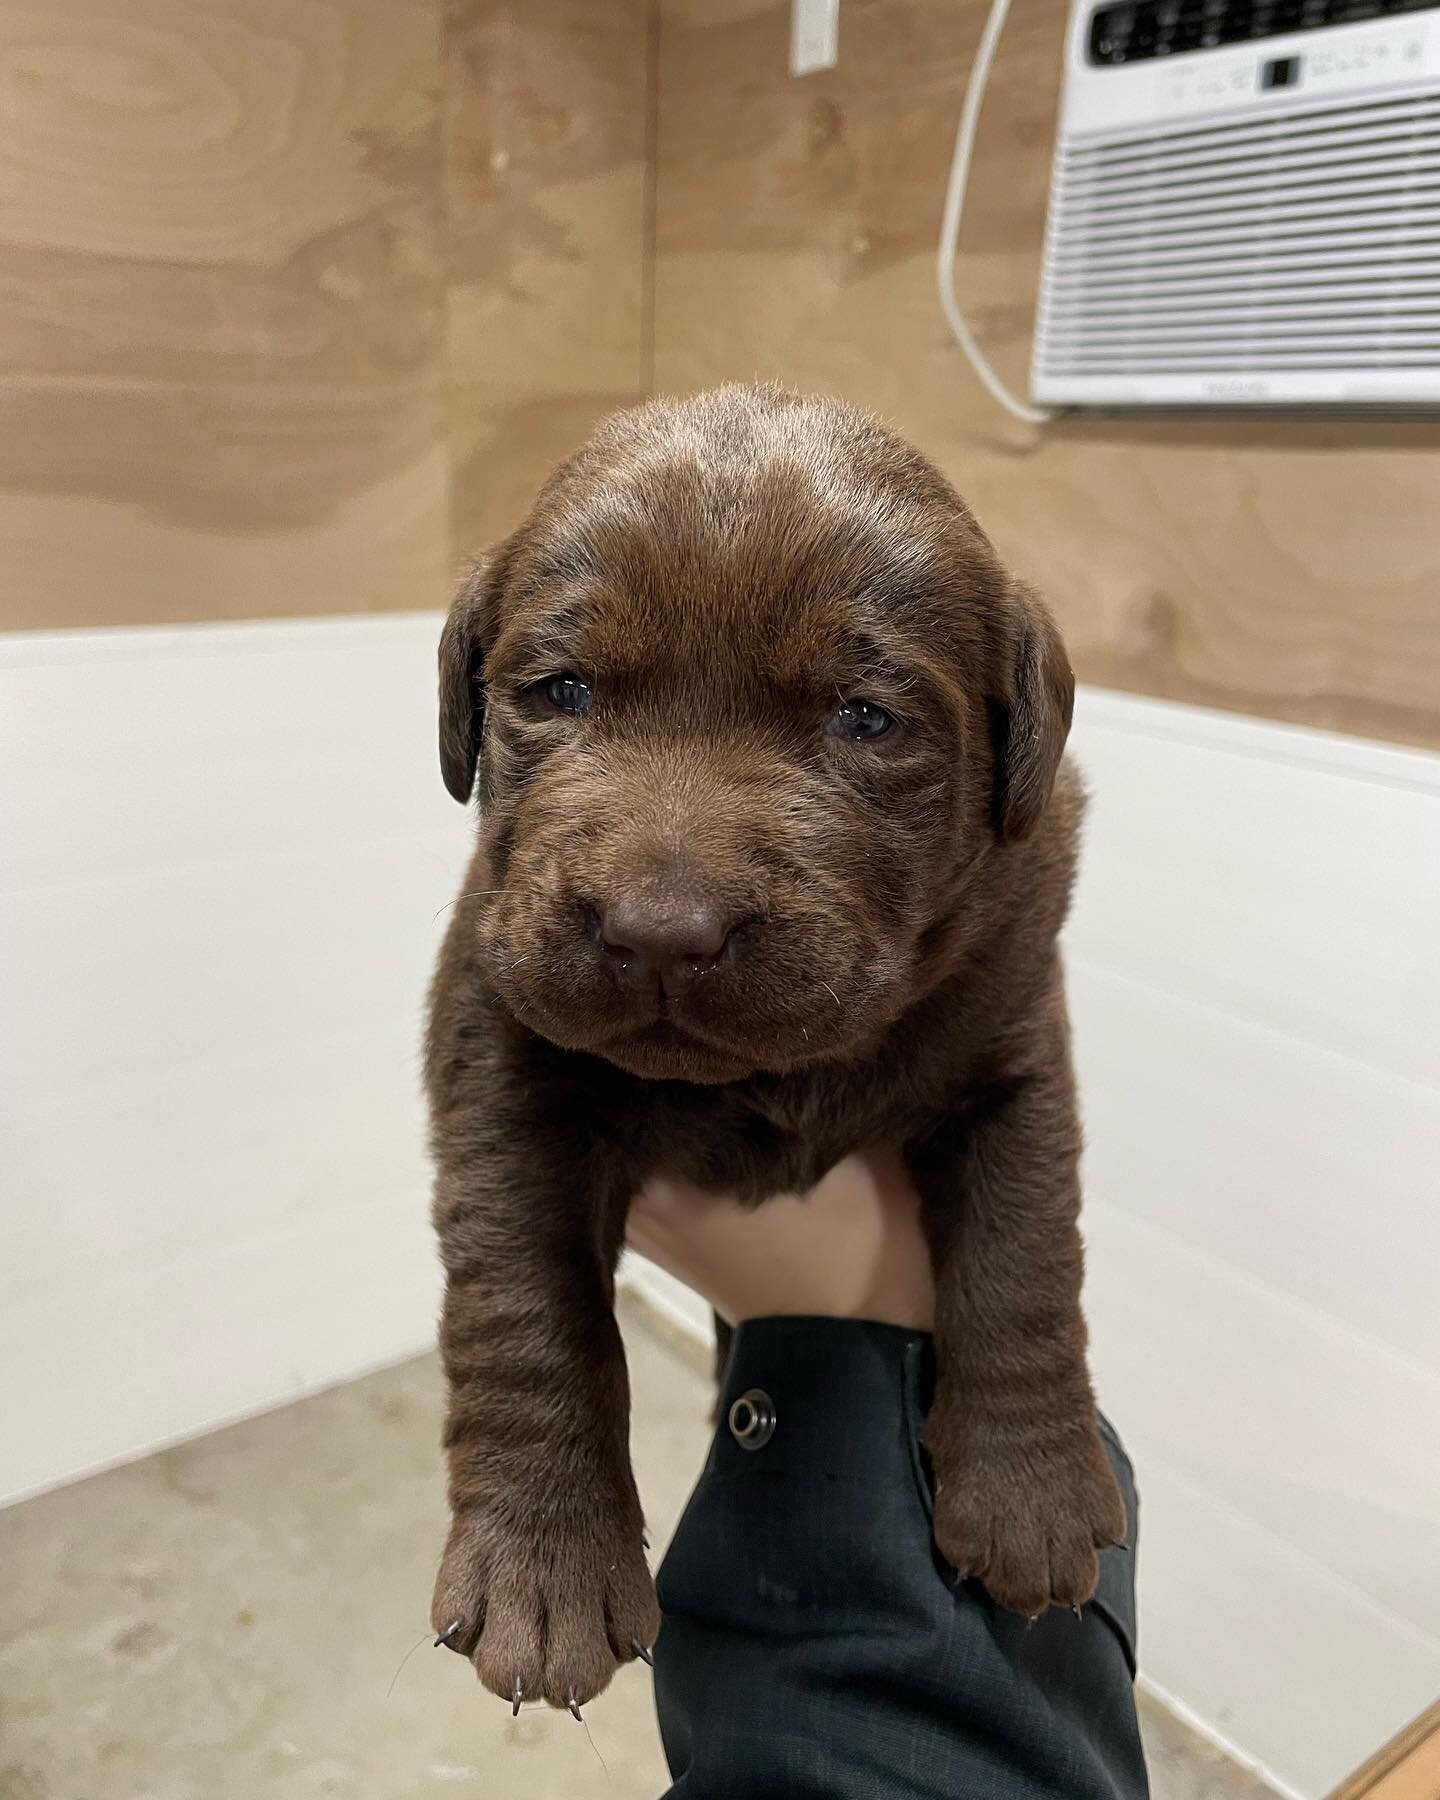 Look at this handsome boys face!!! 🥰 there are still 3 chocolate males and 1 black female available!